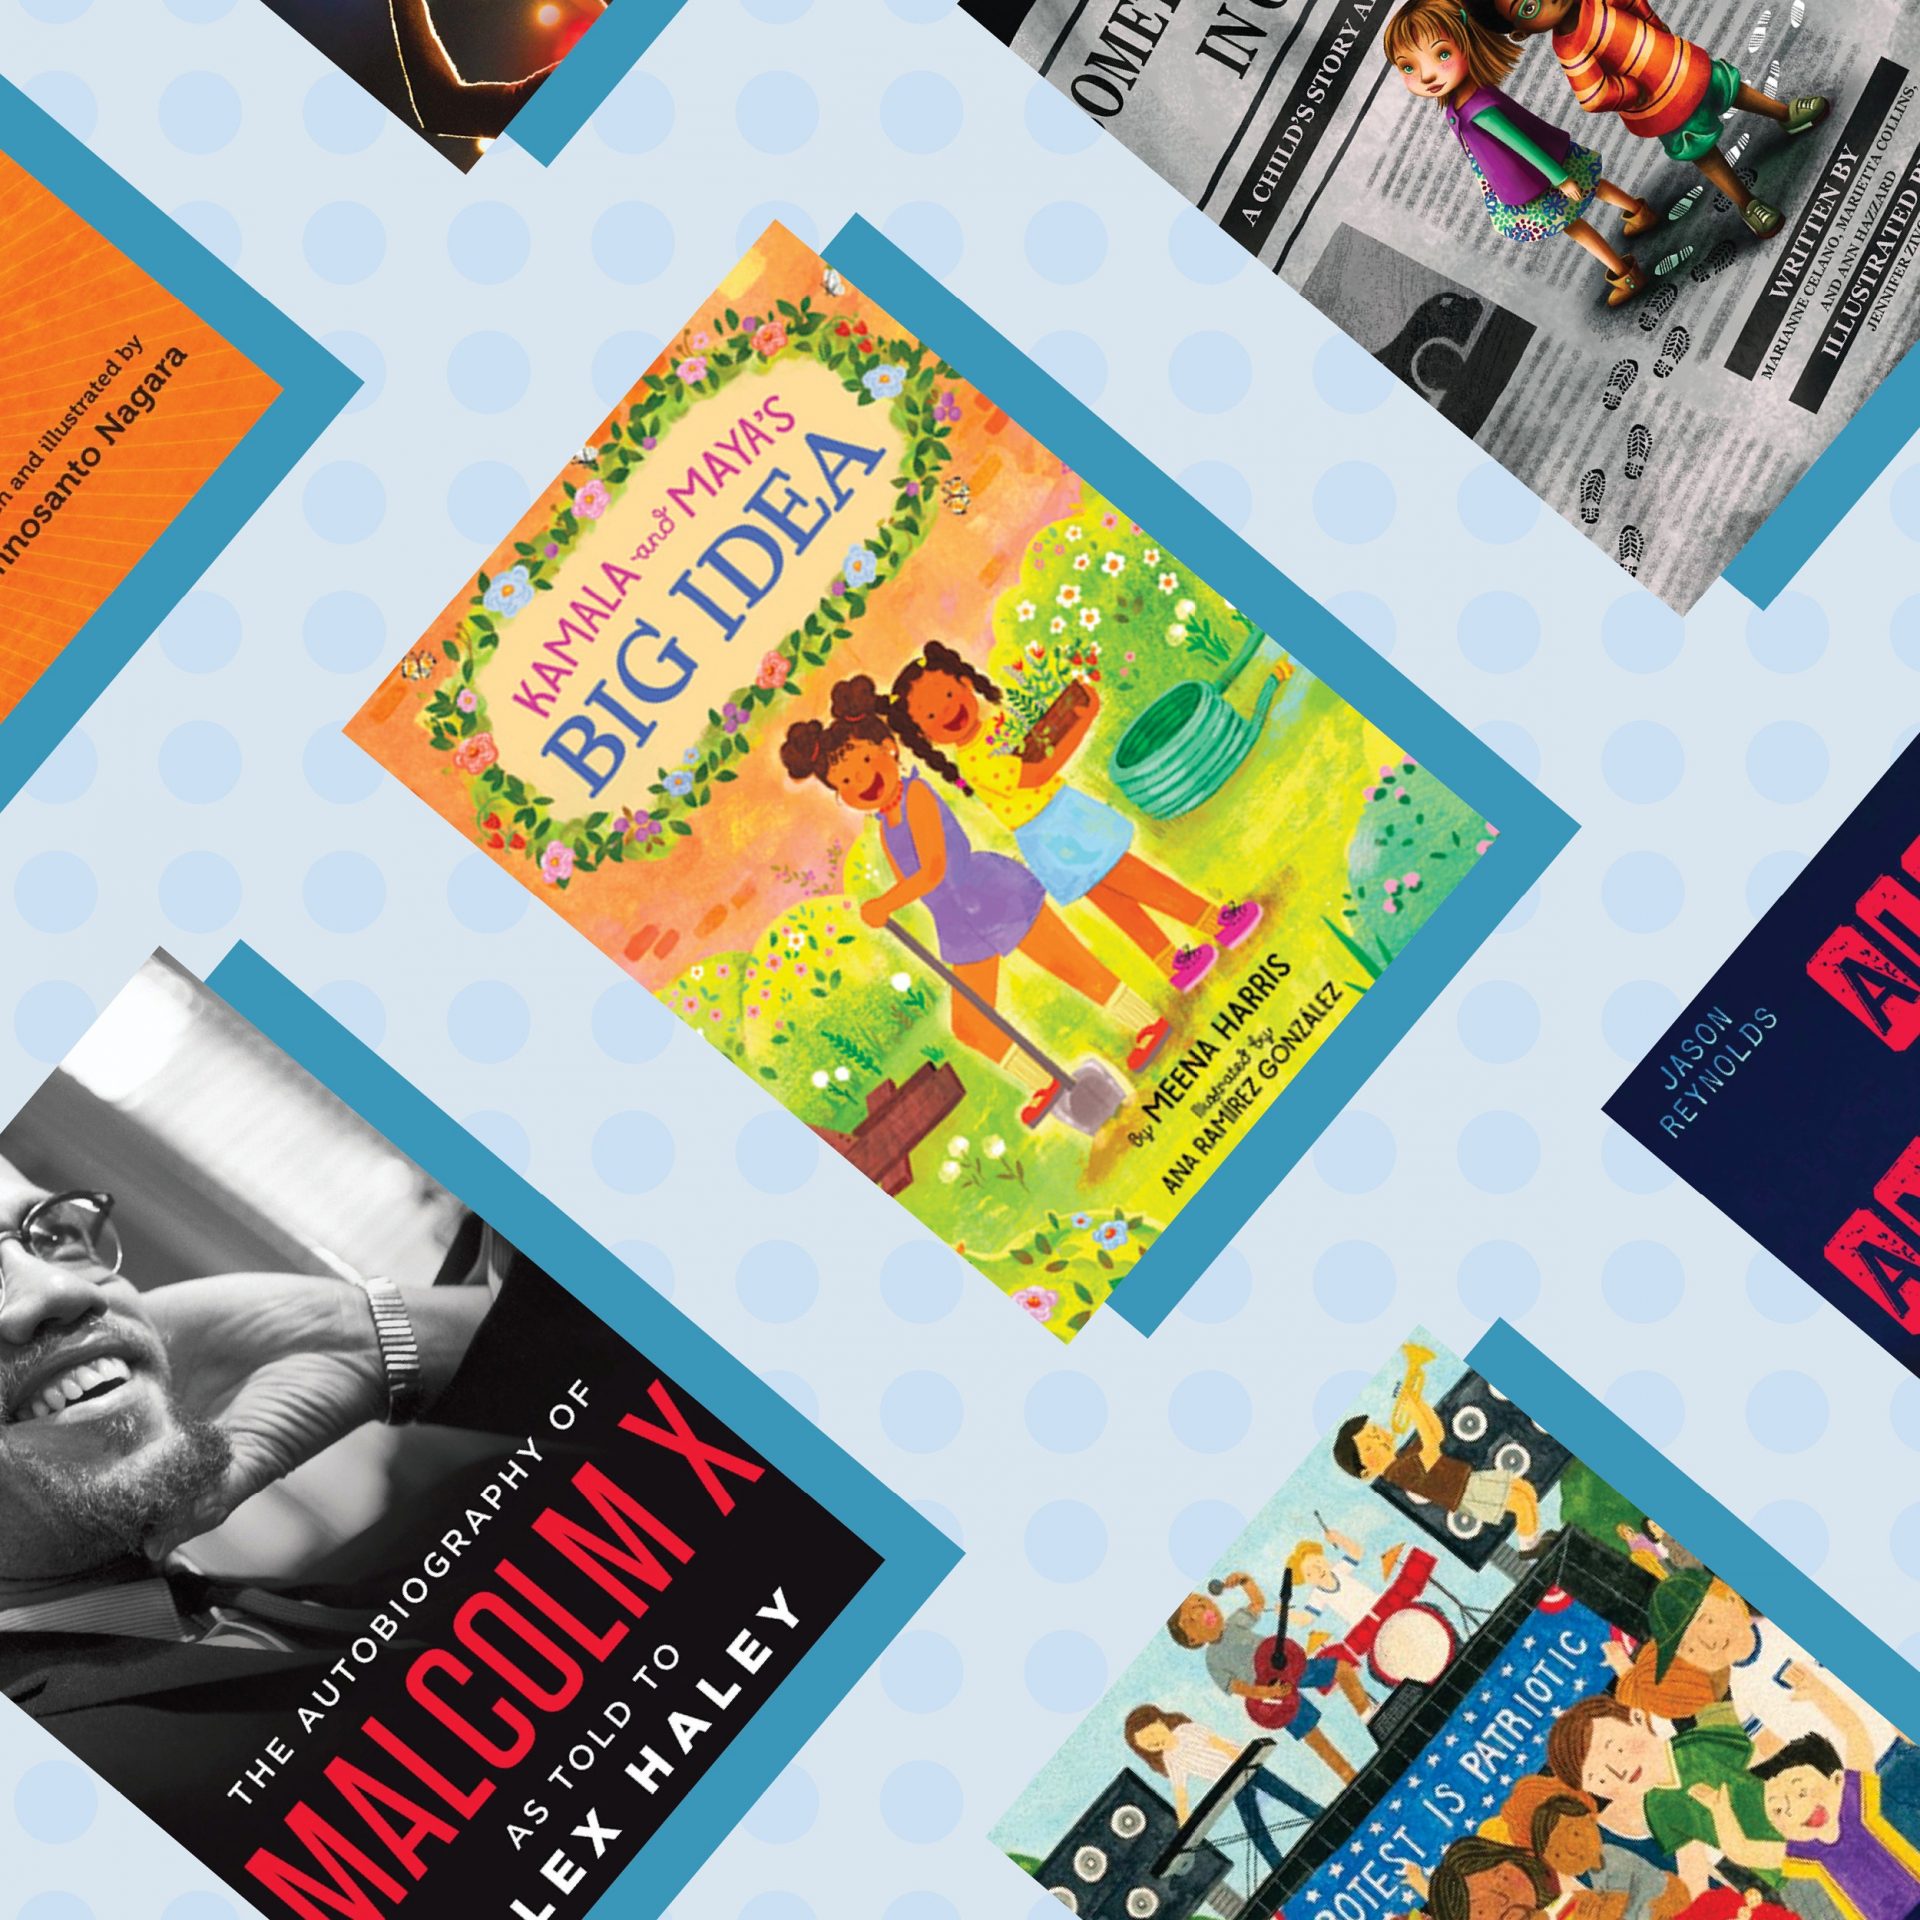 7 Books About Bustle Parents Can Purchase for Their Childhood